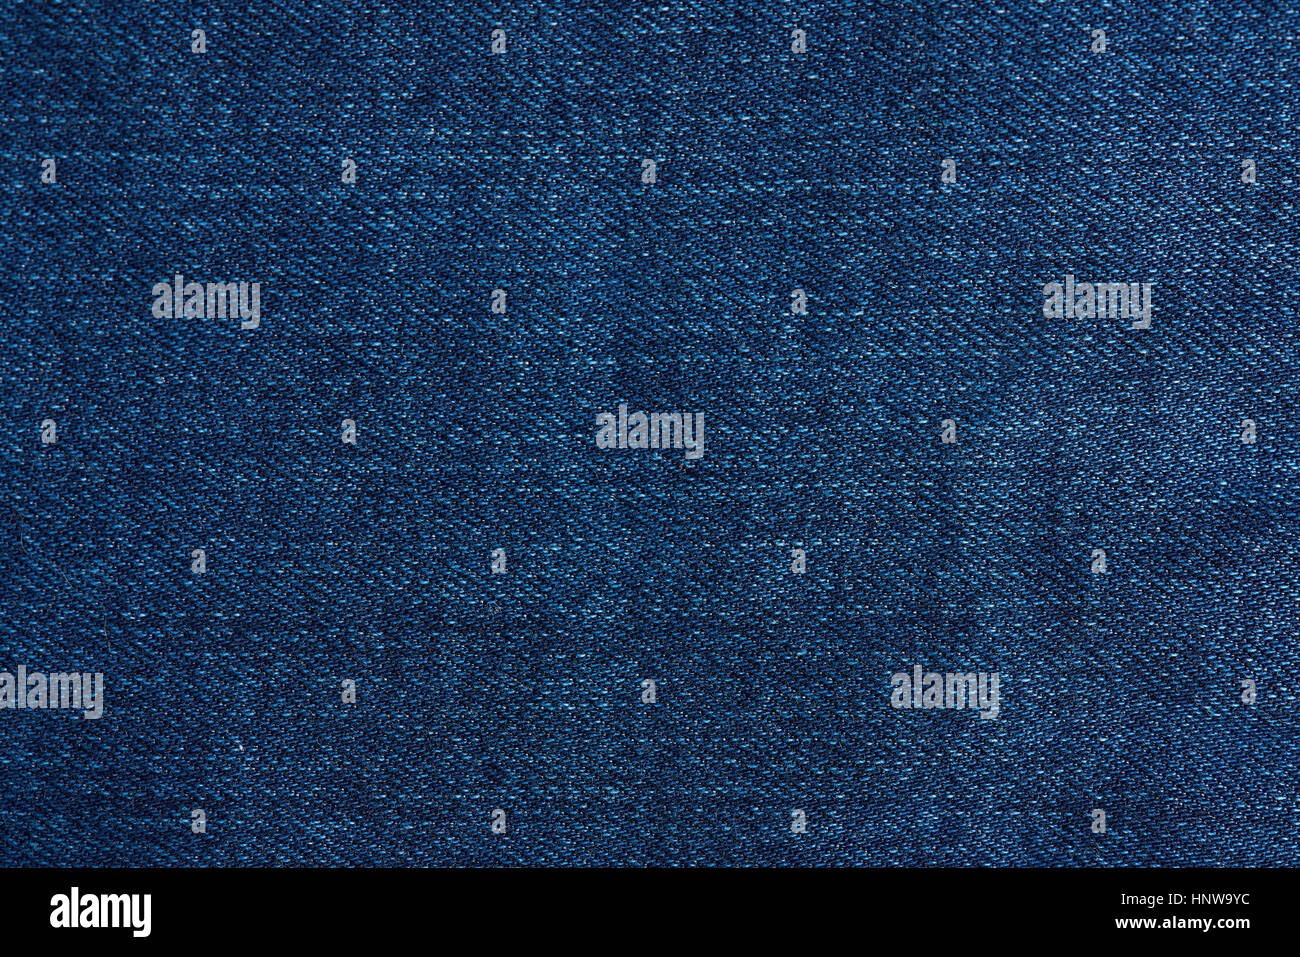 Blue jeans background with lines threads macro view Stock Photo